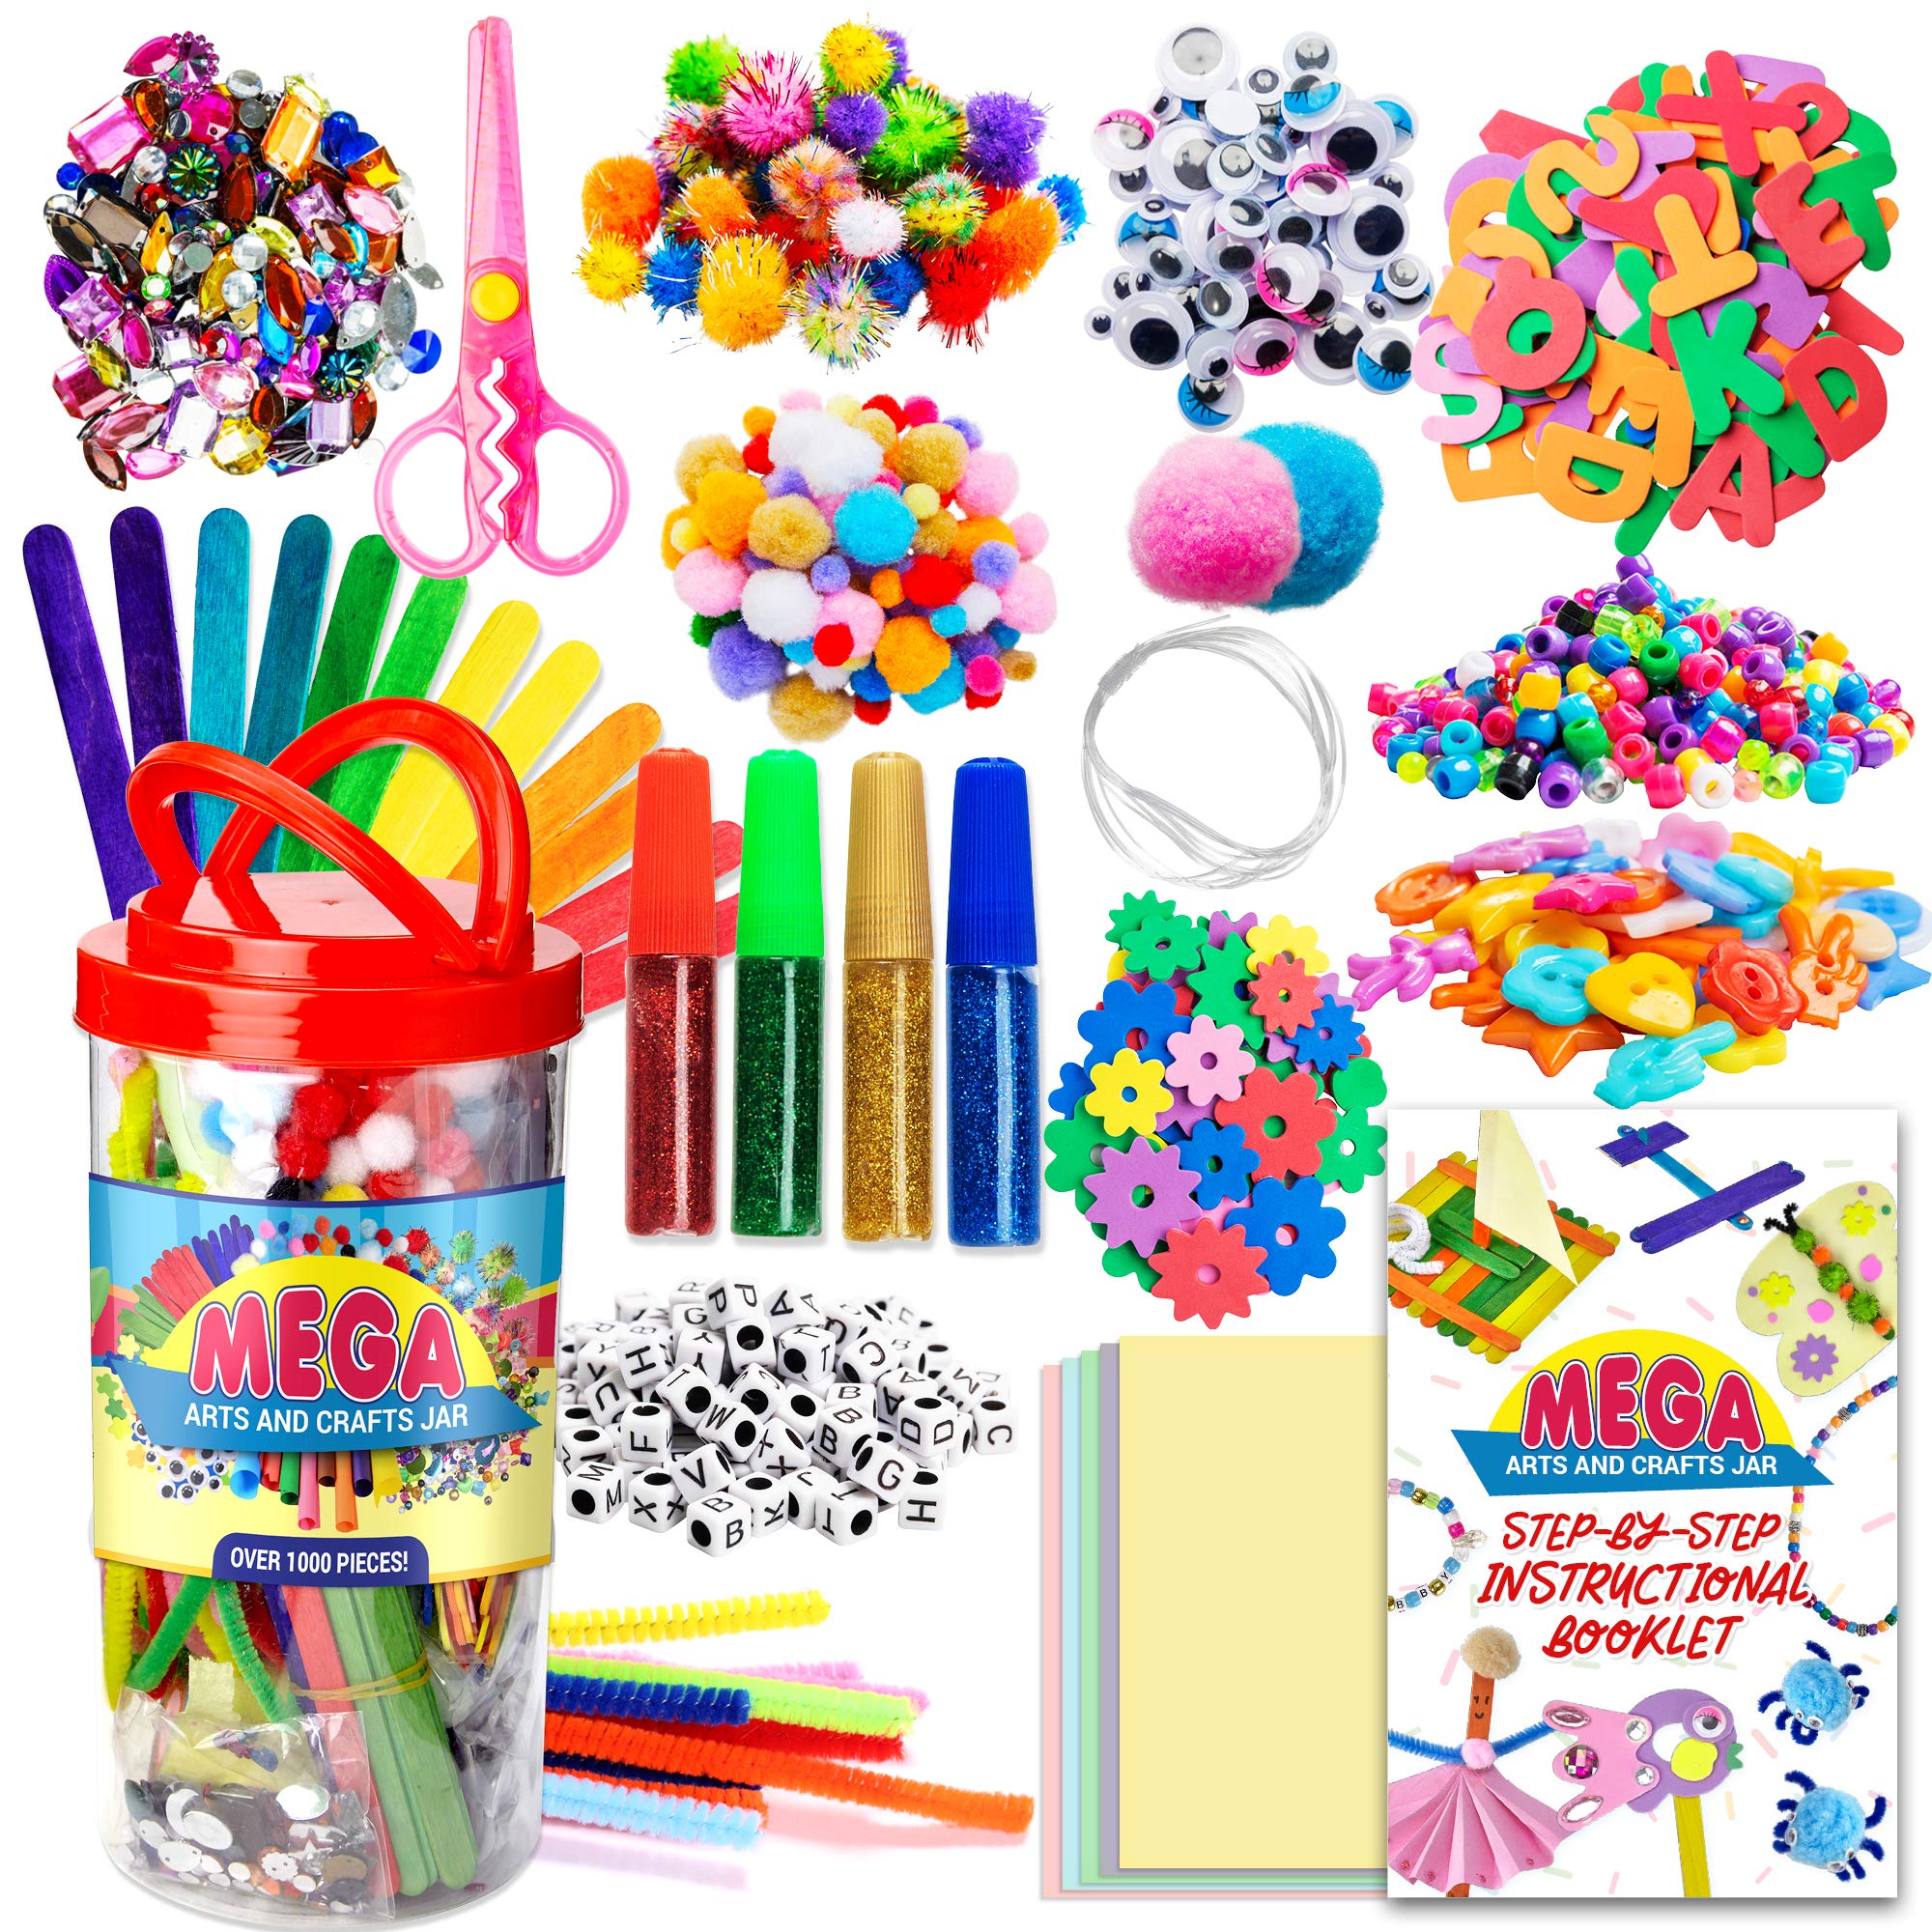 Dragon Too Mega Kids Crafts and Art Supplies Jar Kit - 1000+ Piece Set - Instructional Booklet Included - Glitter Glue, Construction Paper, Colored Popsicle Sticks, Googly Eyes, Pipe Cleaners